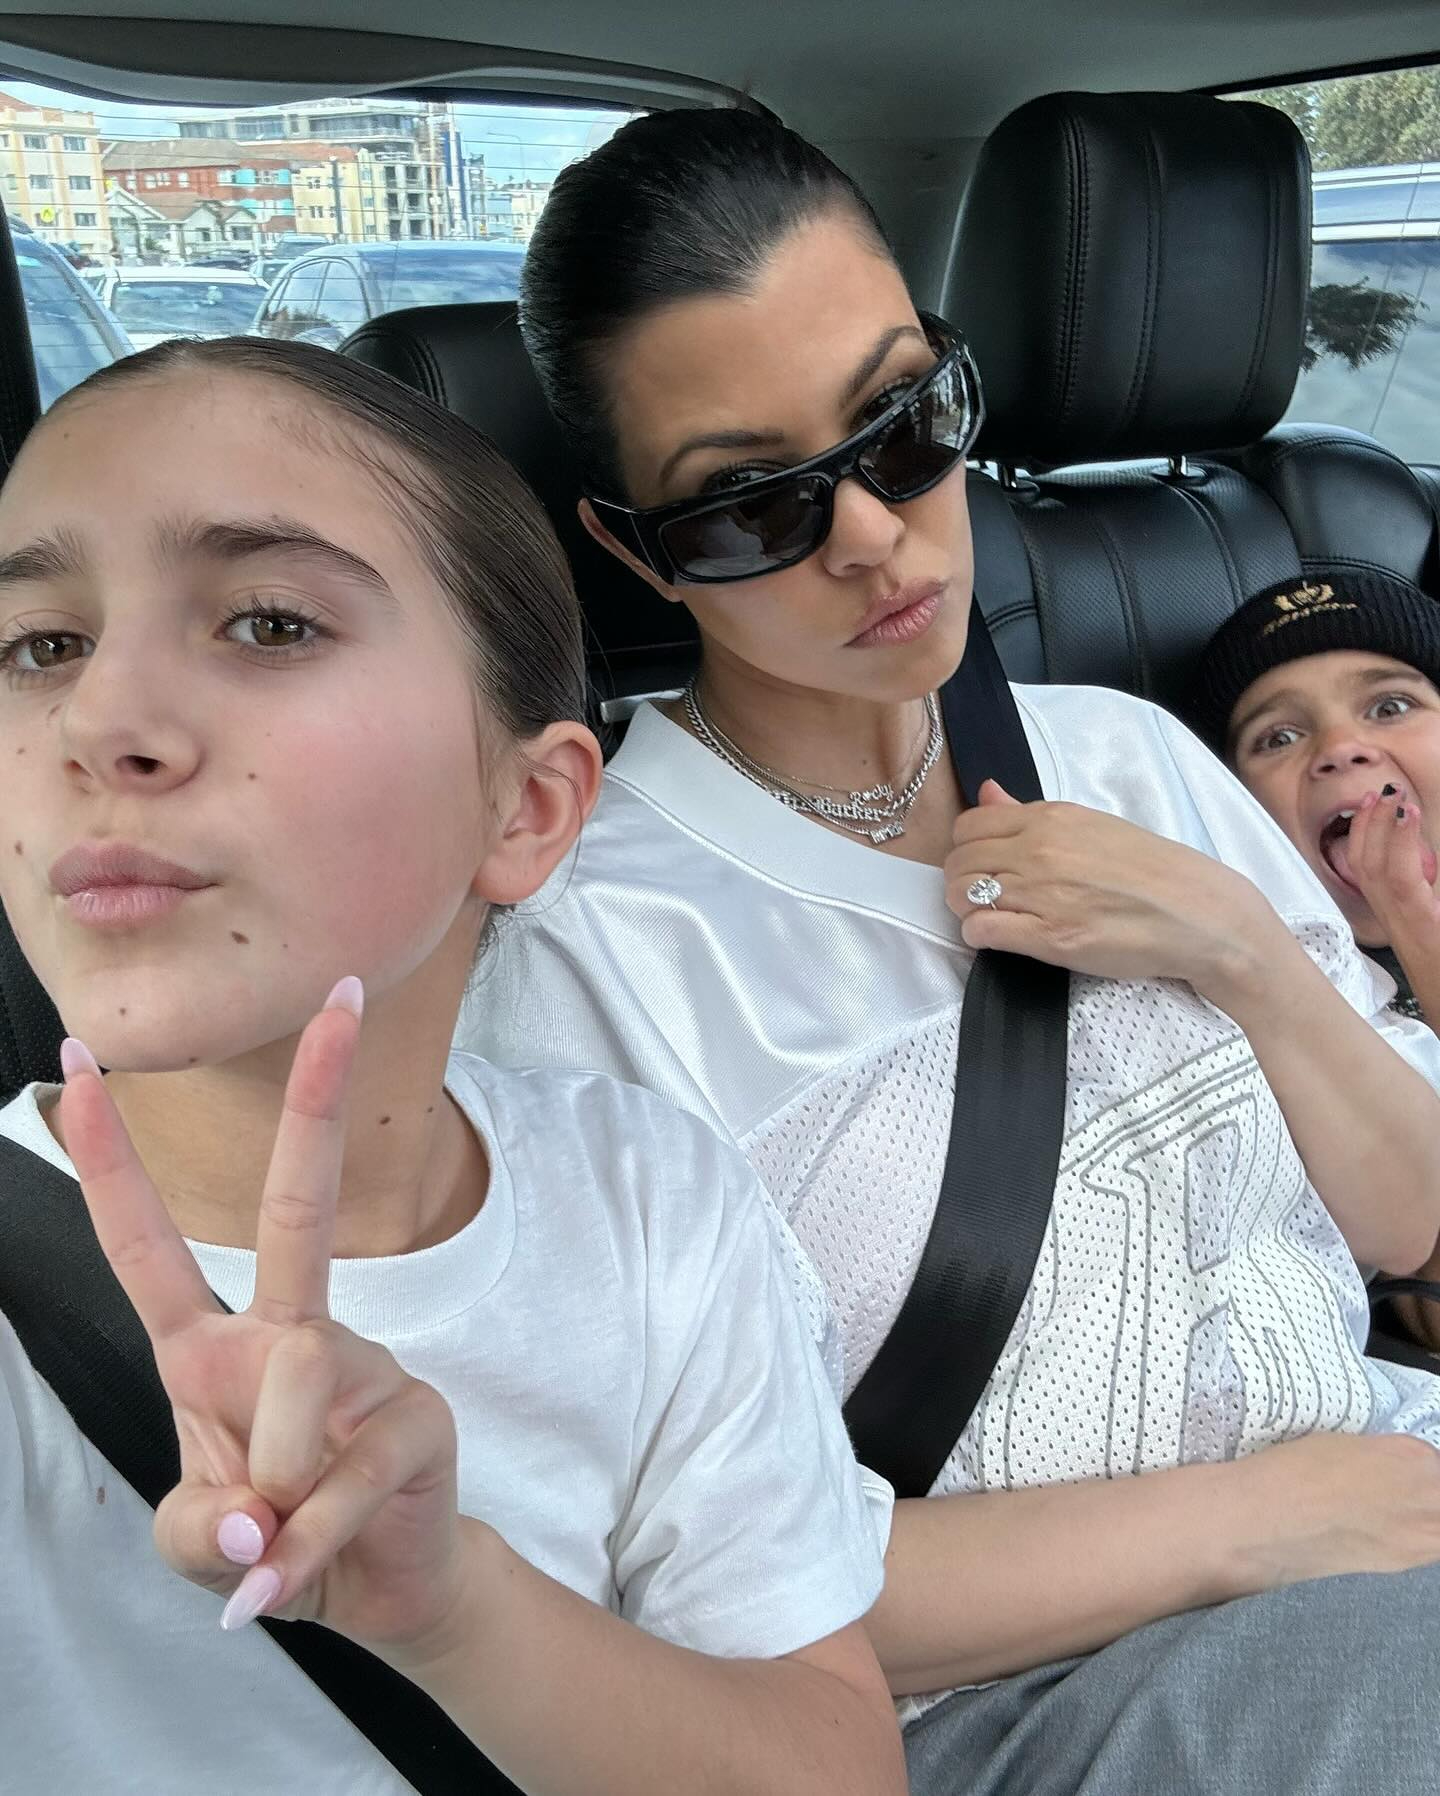 Another picture showed Reign and his sister Penelope posing for a photo with their mom Kourtney